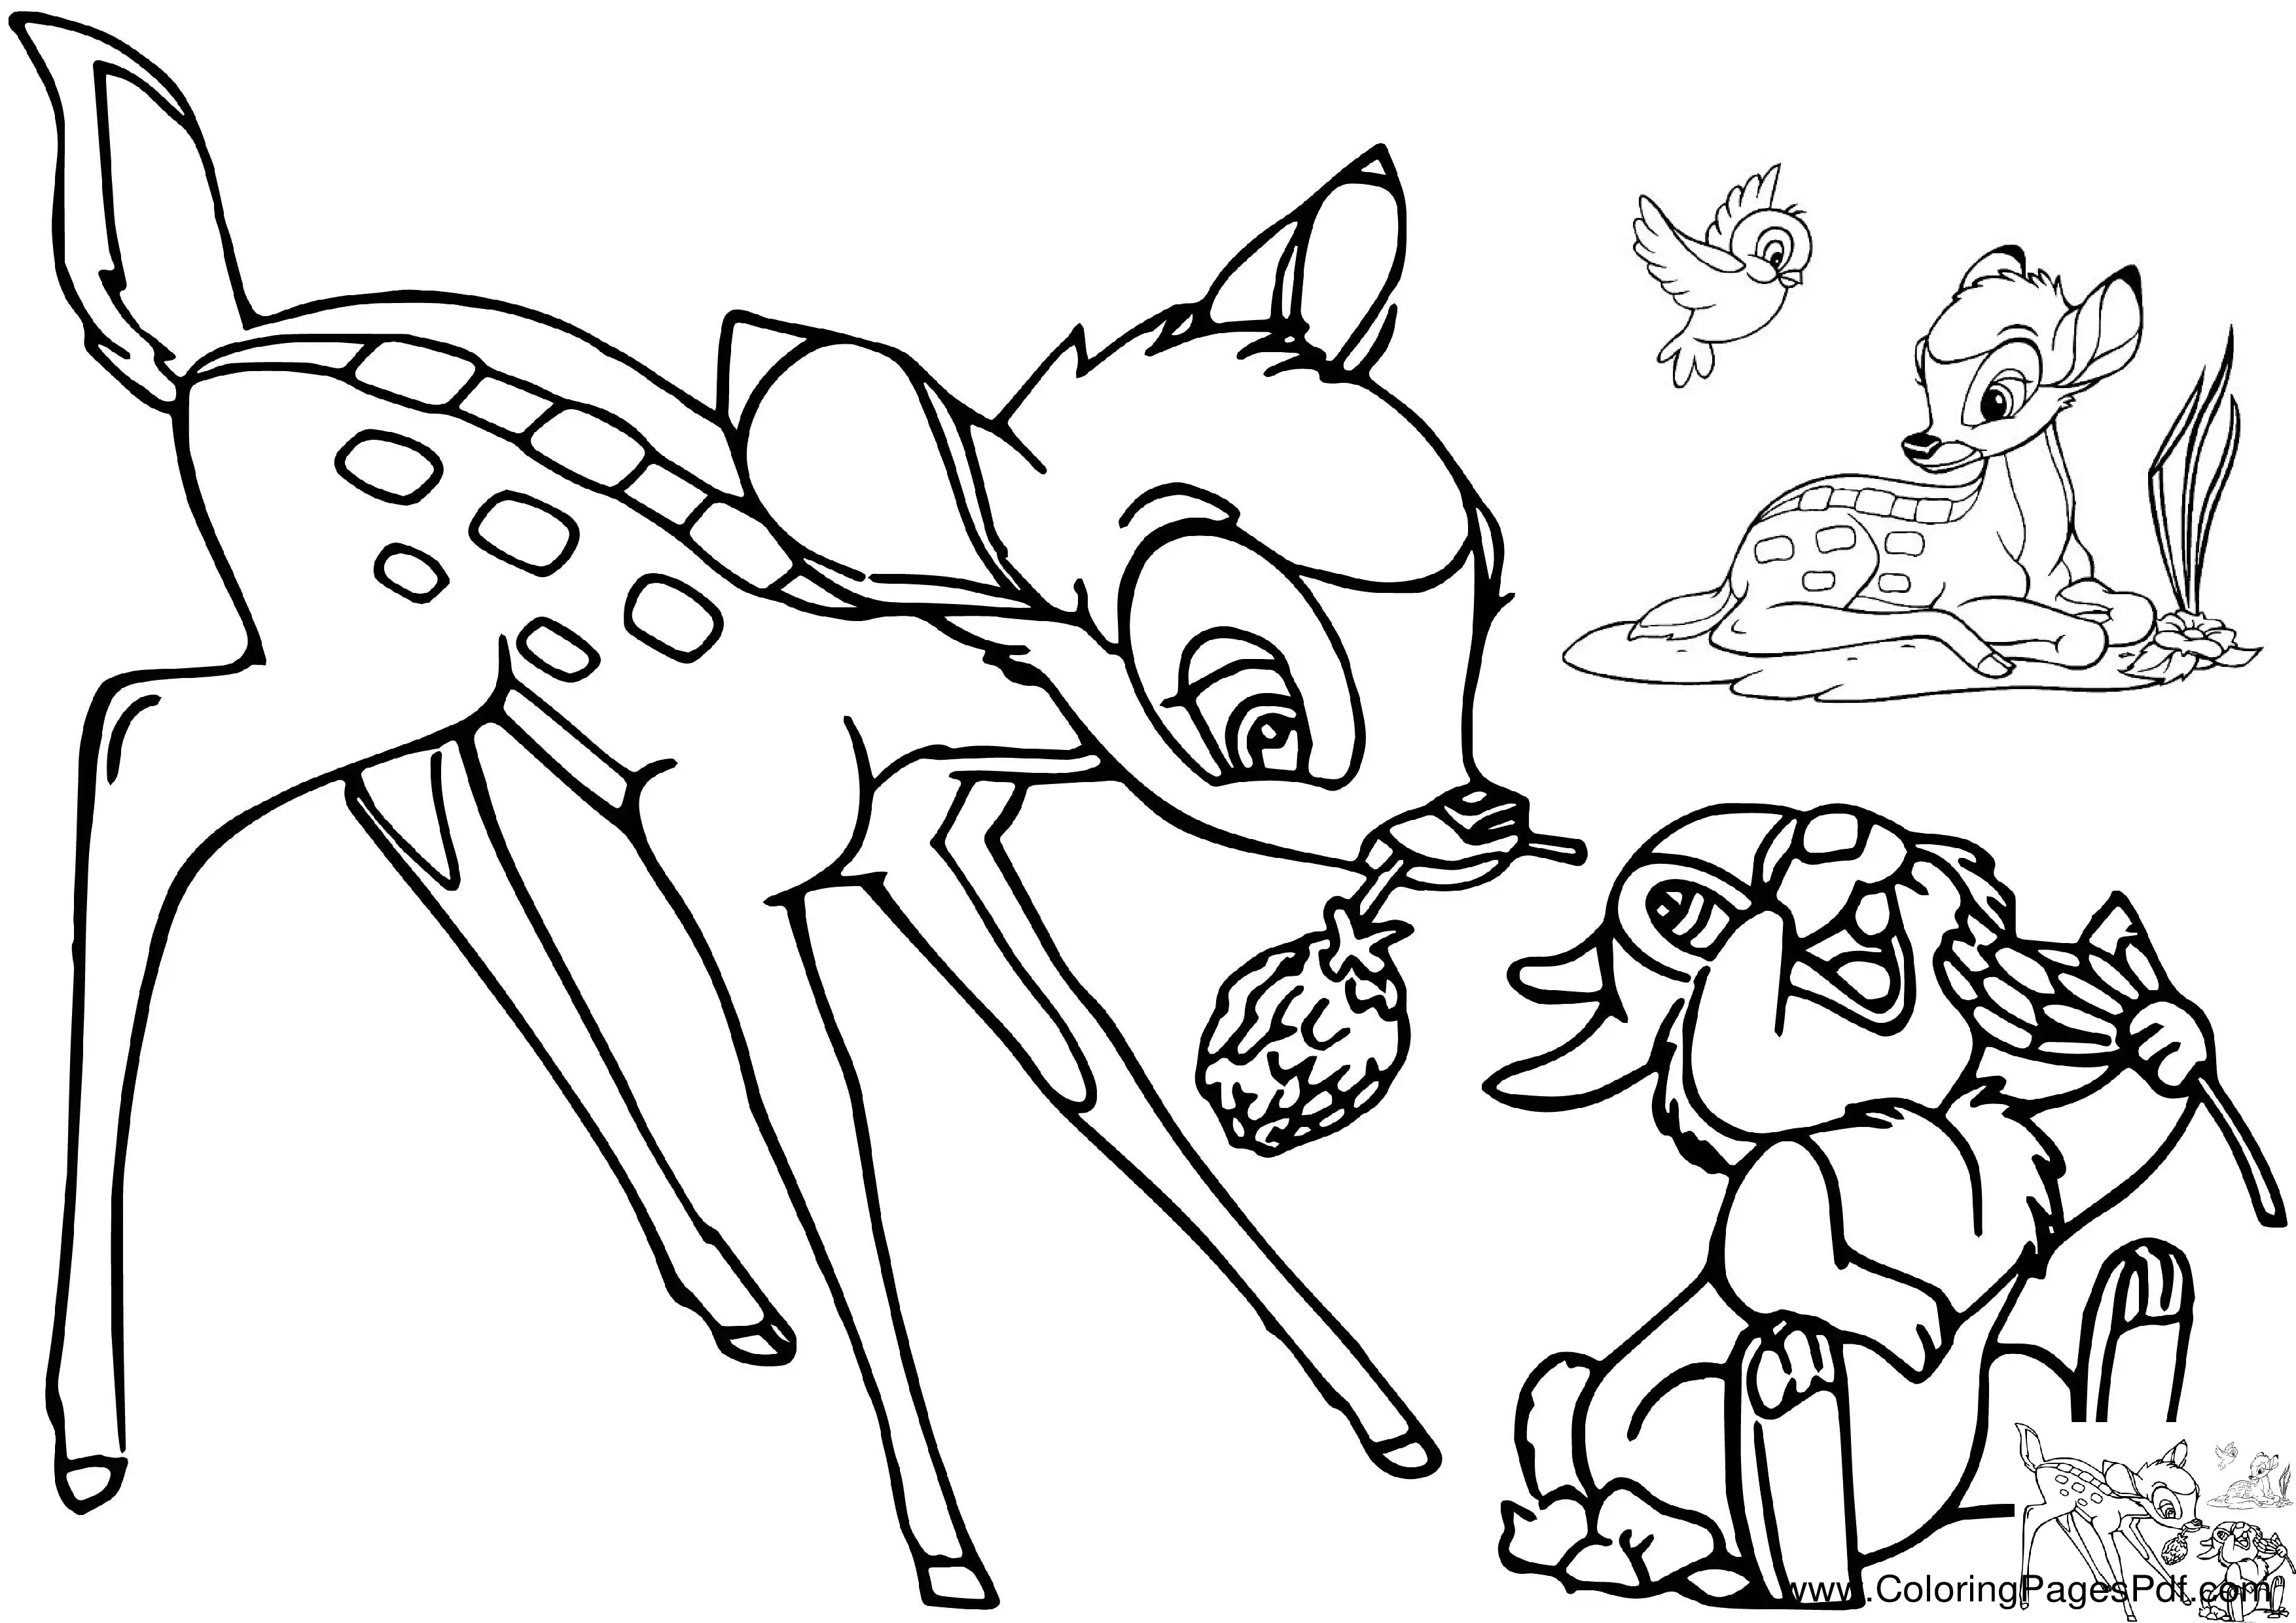 Coloring pages for kids disney